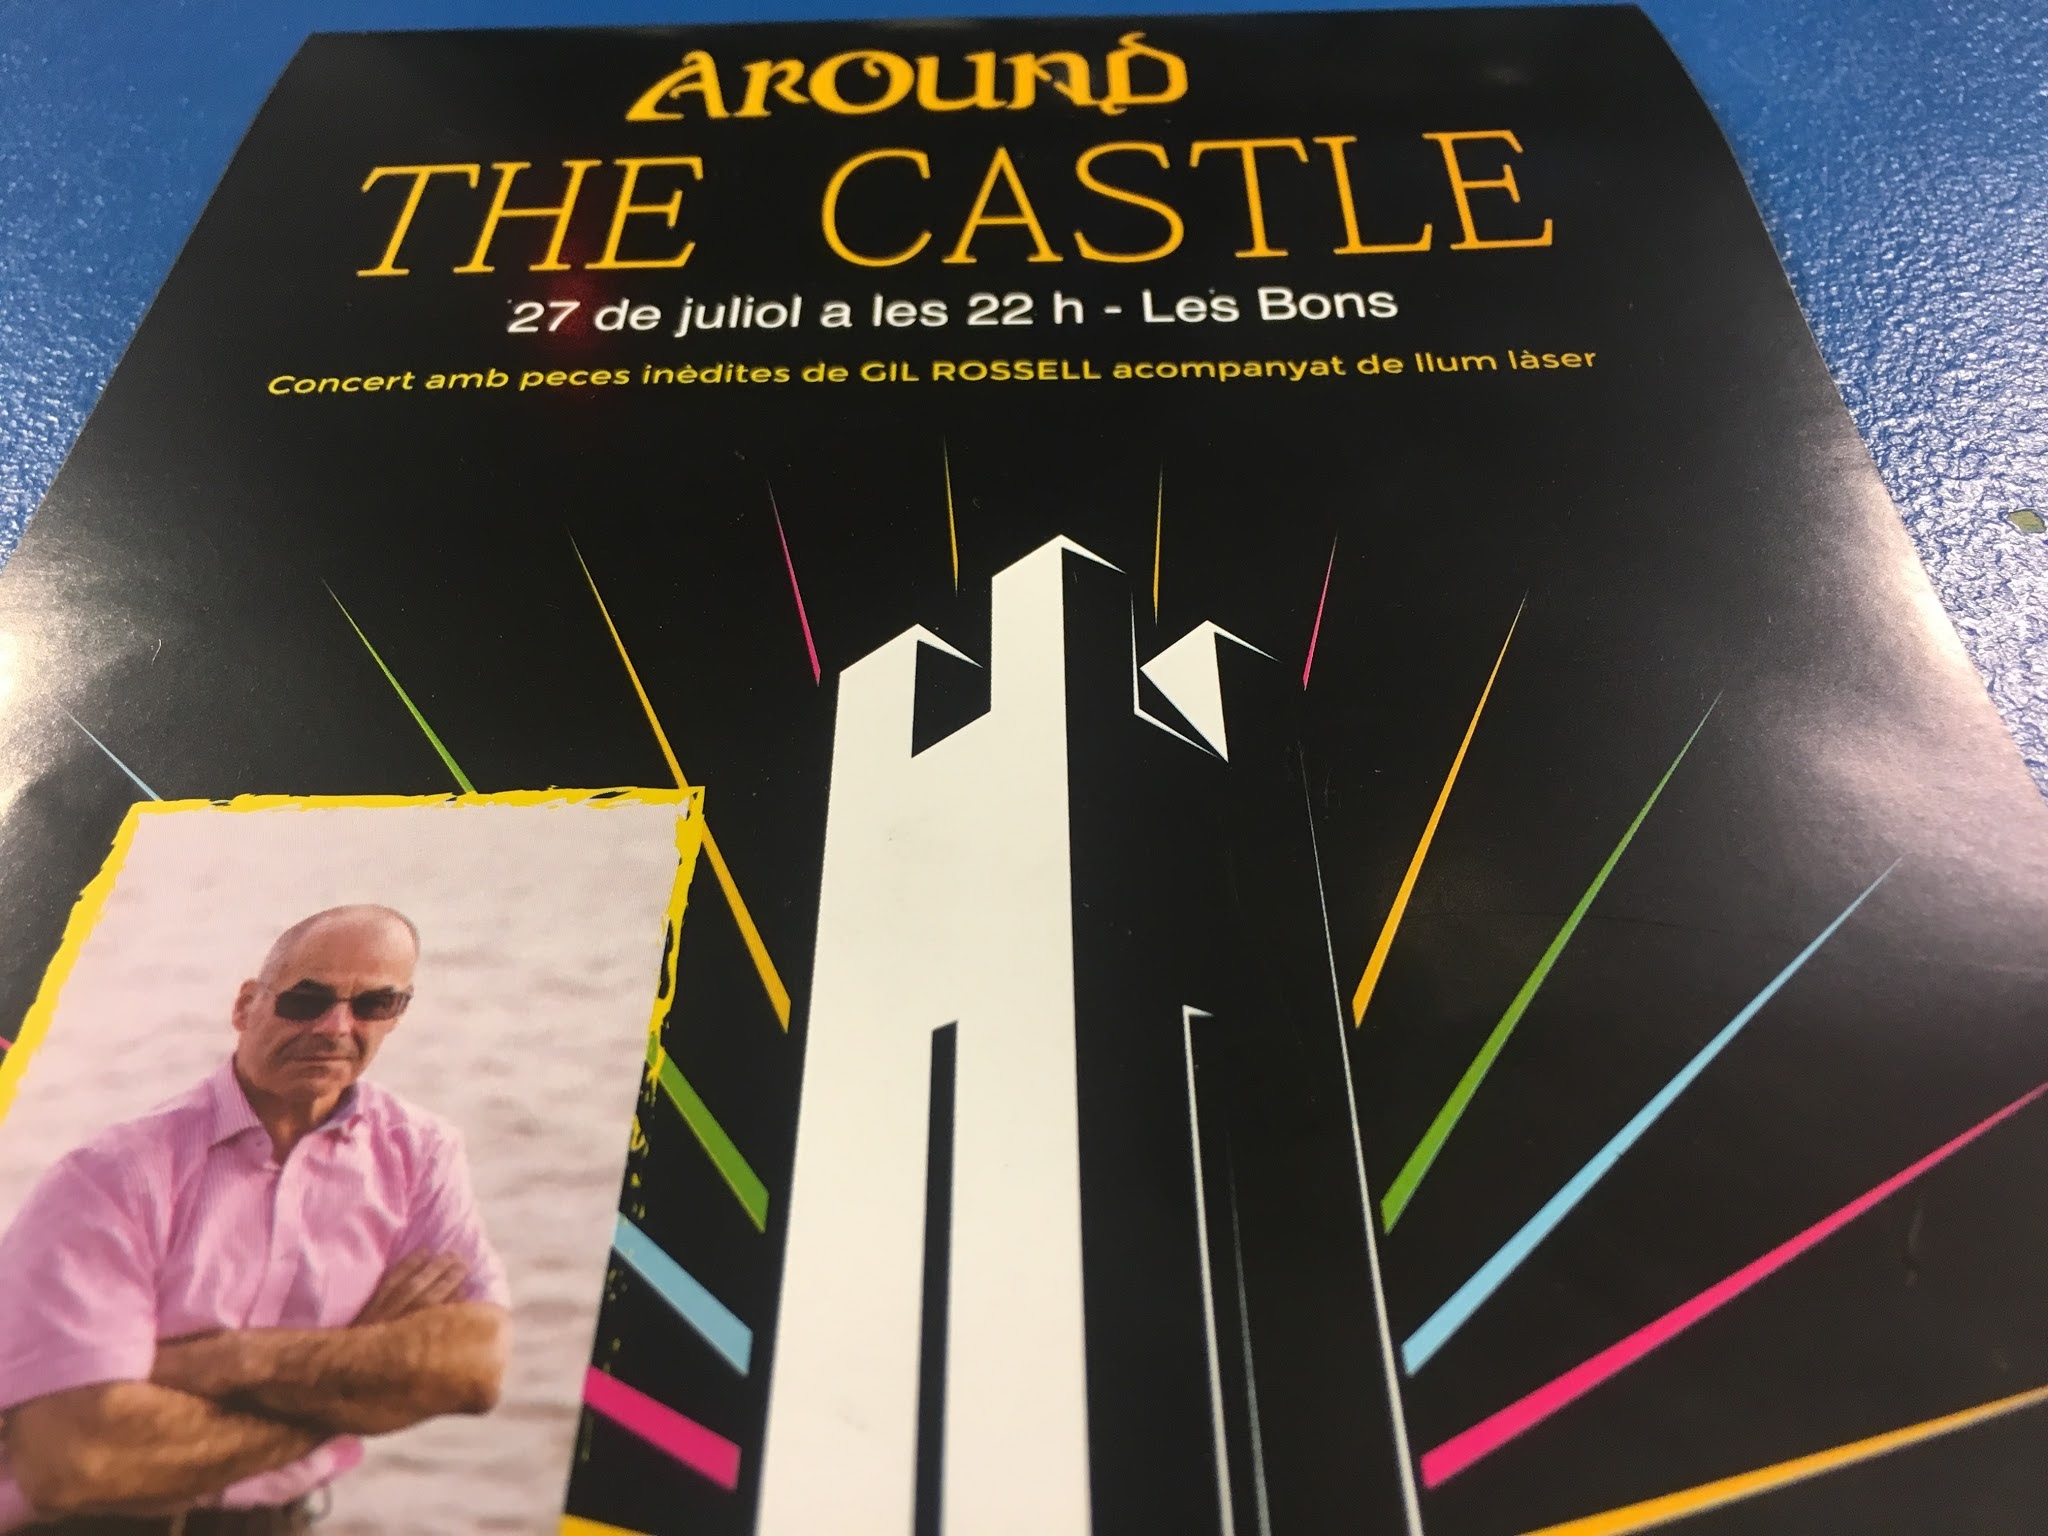 "Around the castle", amb Gil Rossell, a Les Bons